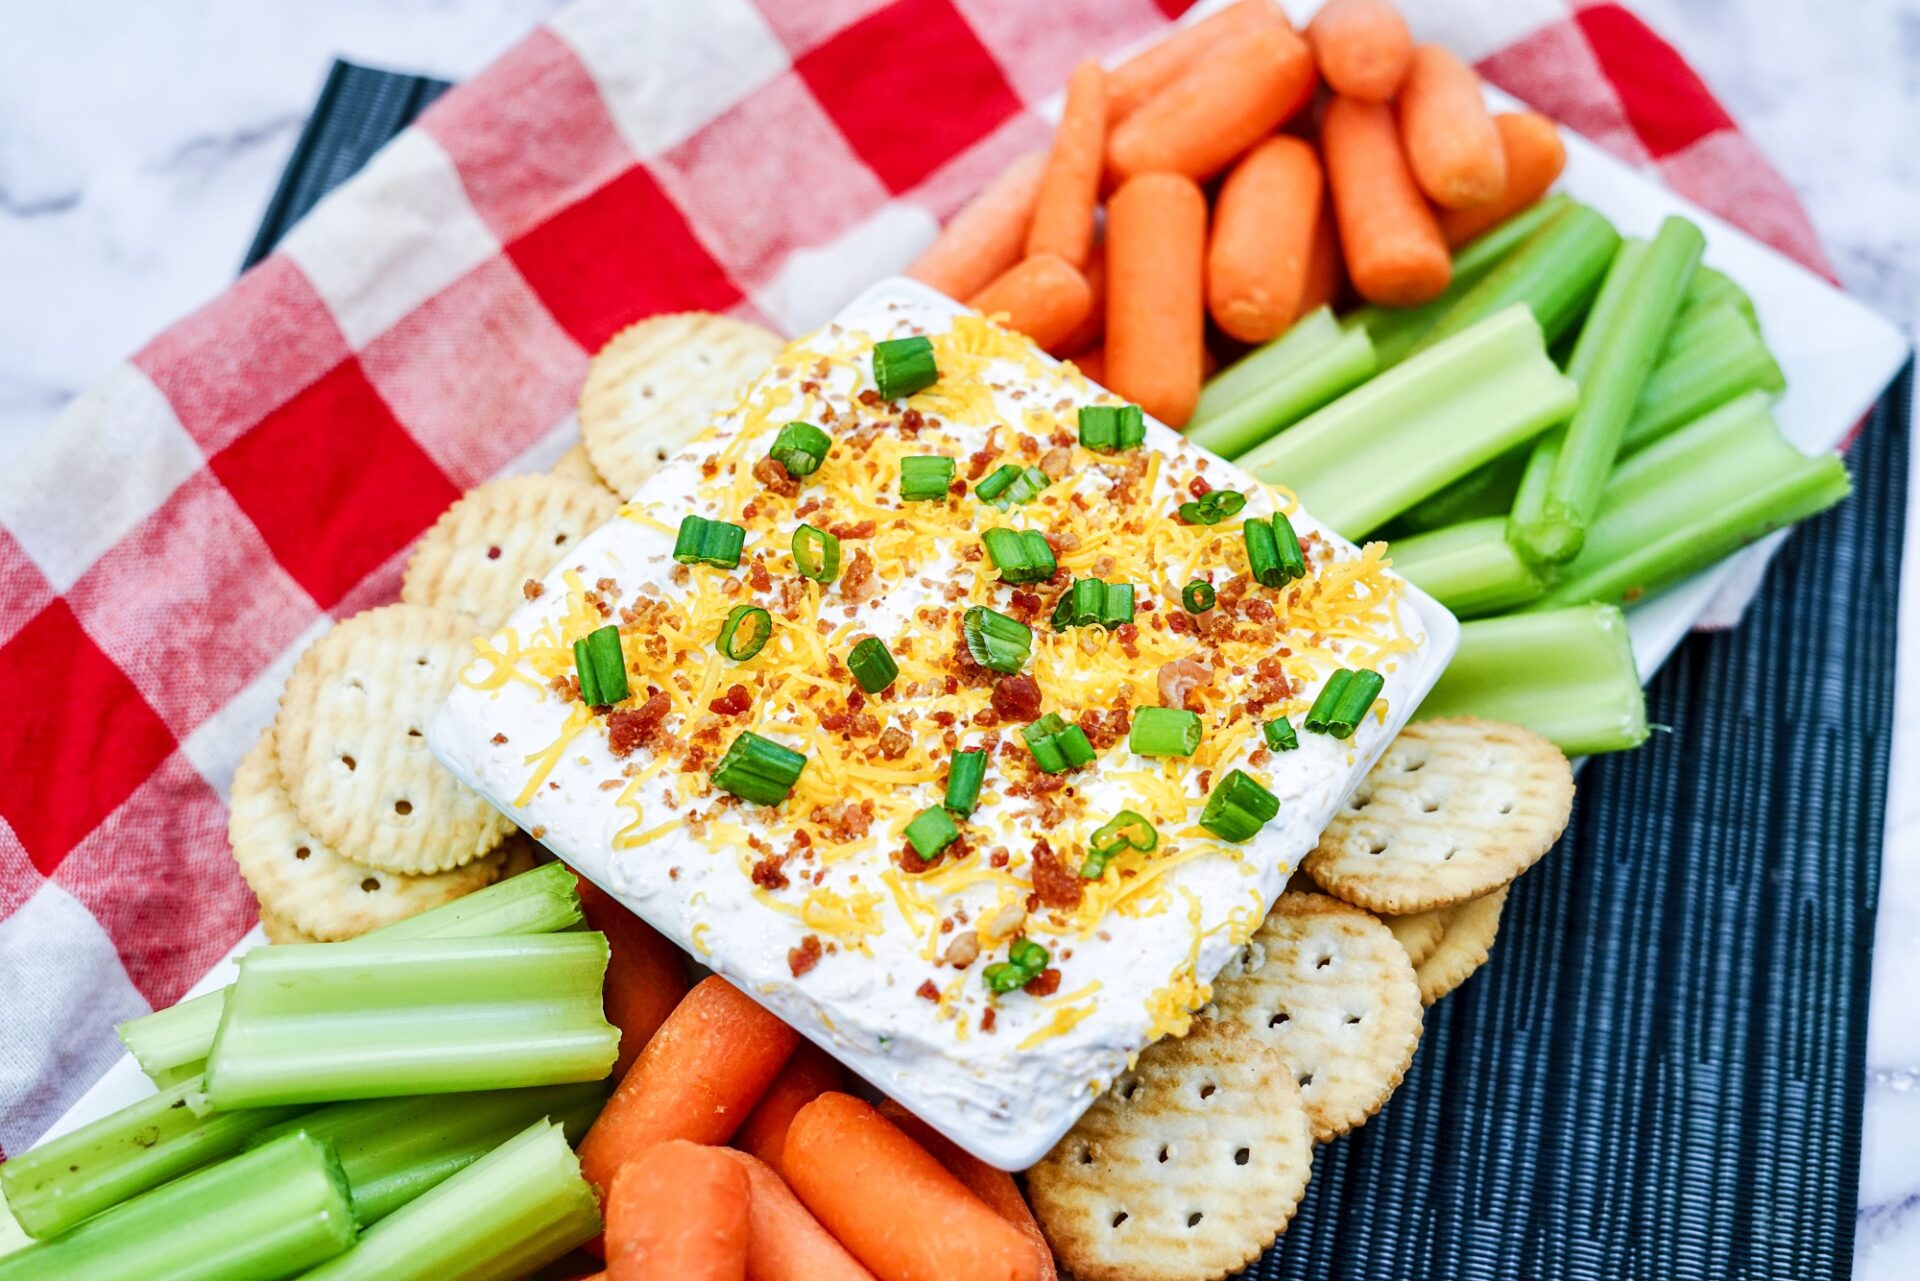 Bacon dip in a bowl surrounded with crackers and vegetables.